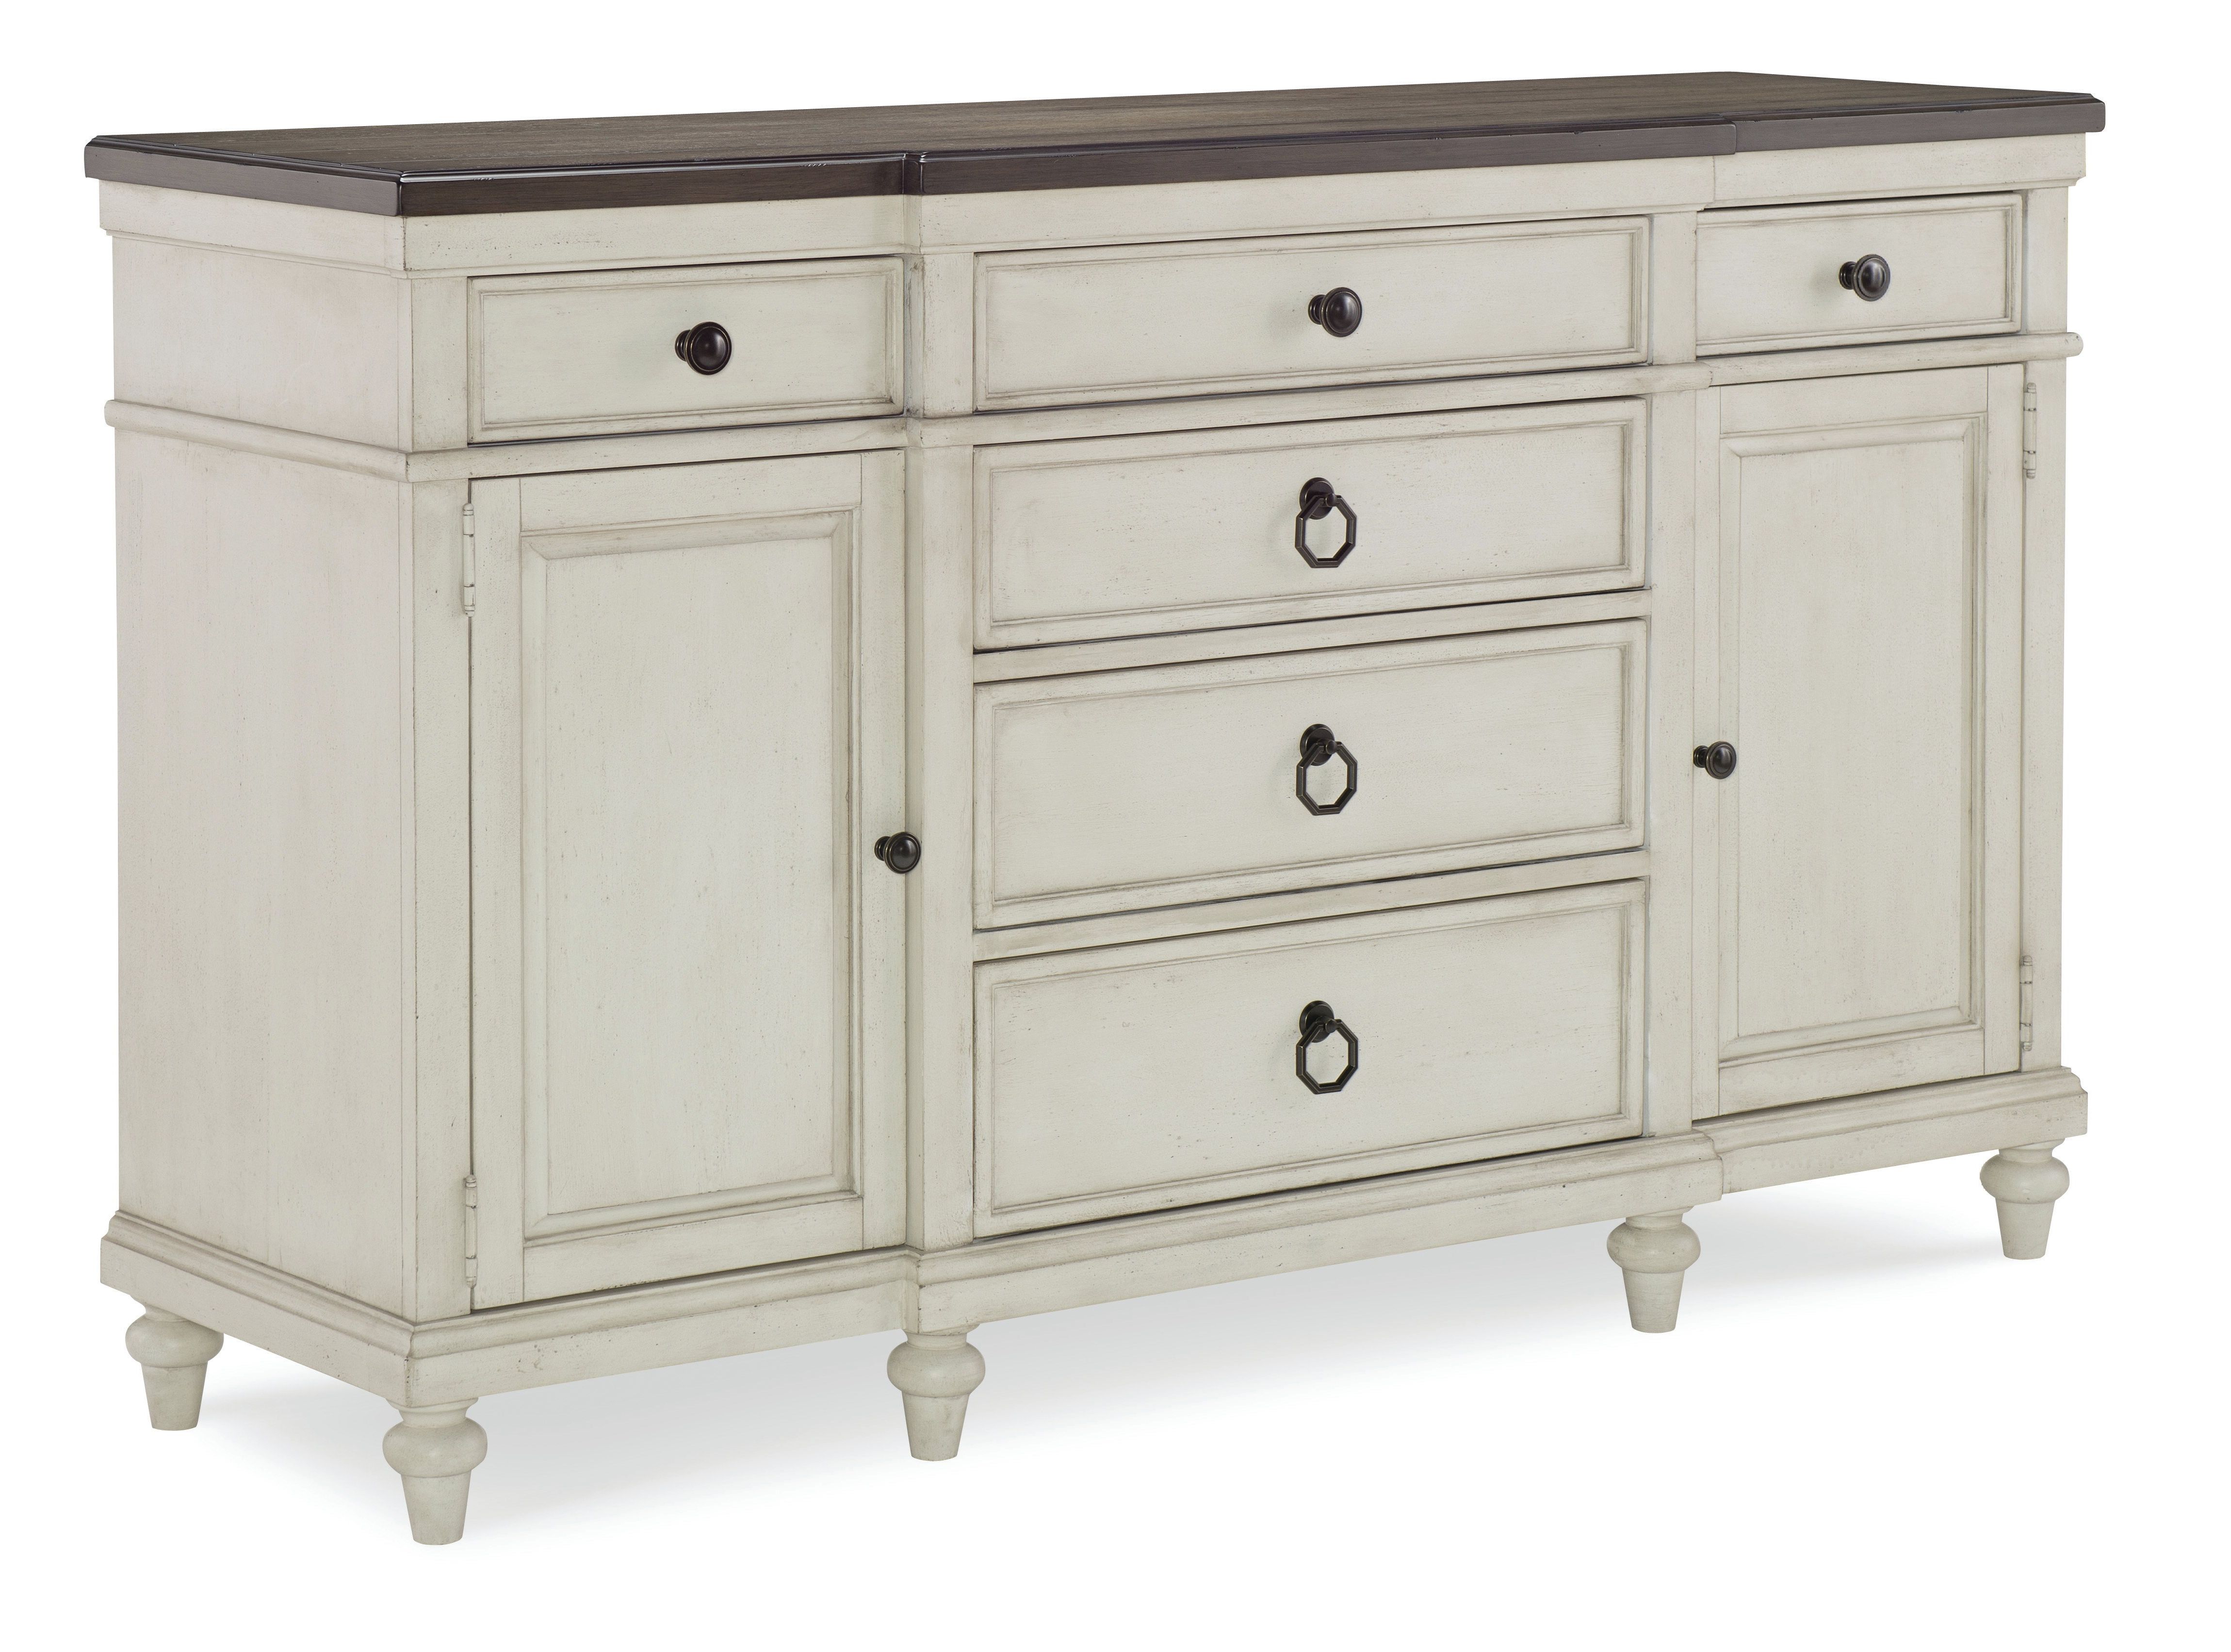 Payton Serving Sideboards Intended For 2020 Silverware Storage Equipped Sideboards & Buffets (View 6 of 20)